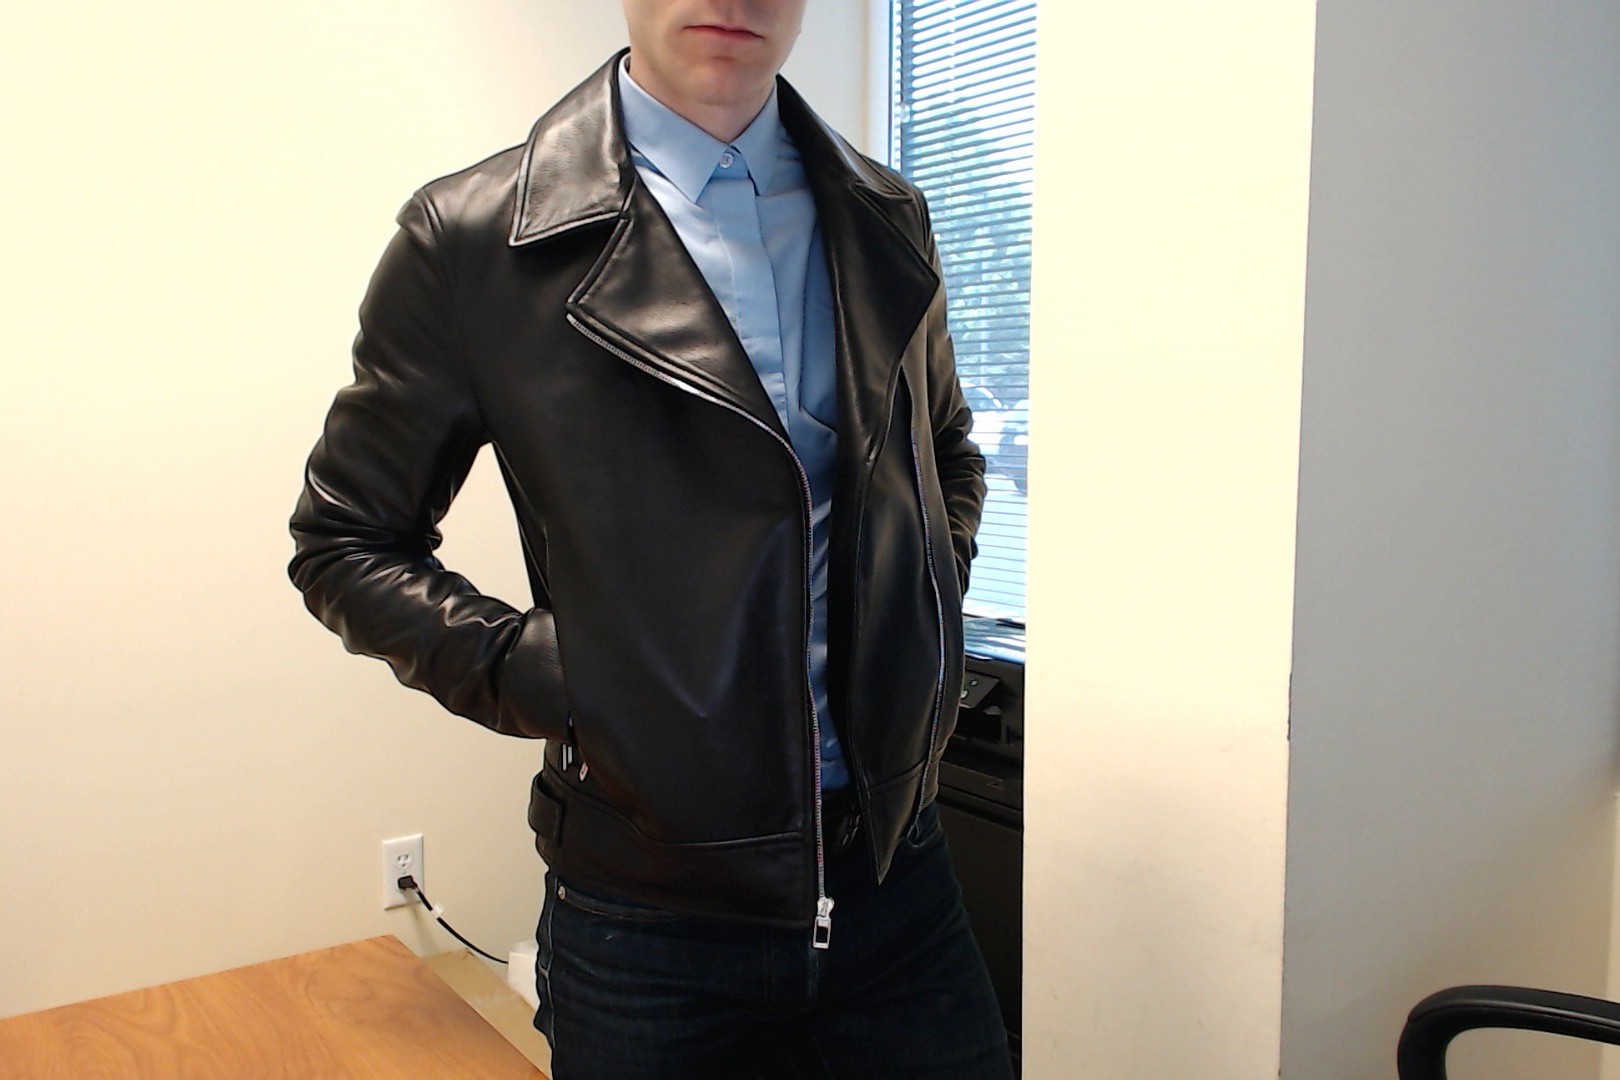 Leather Jackets: Post Pictures of the Best You've Seen/Owned? | Page 519 | Styleforum